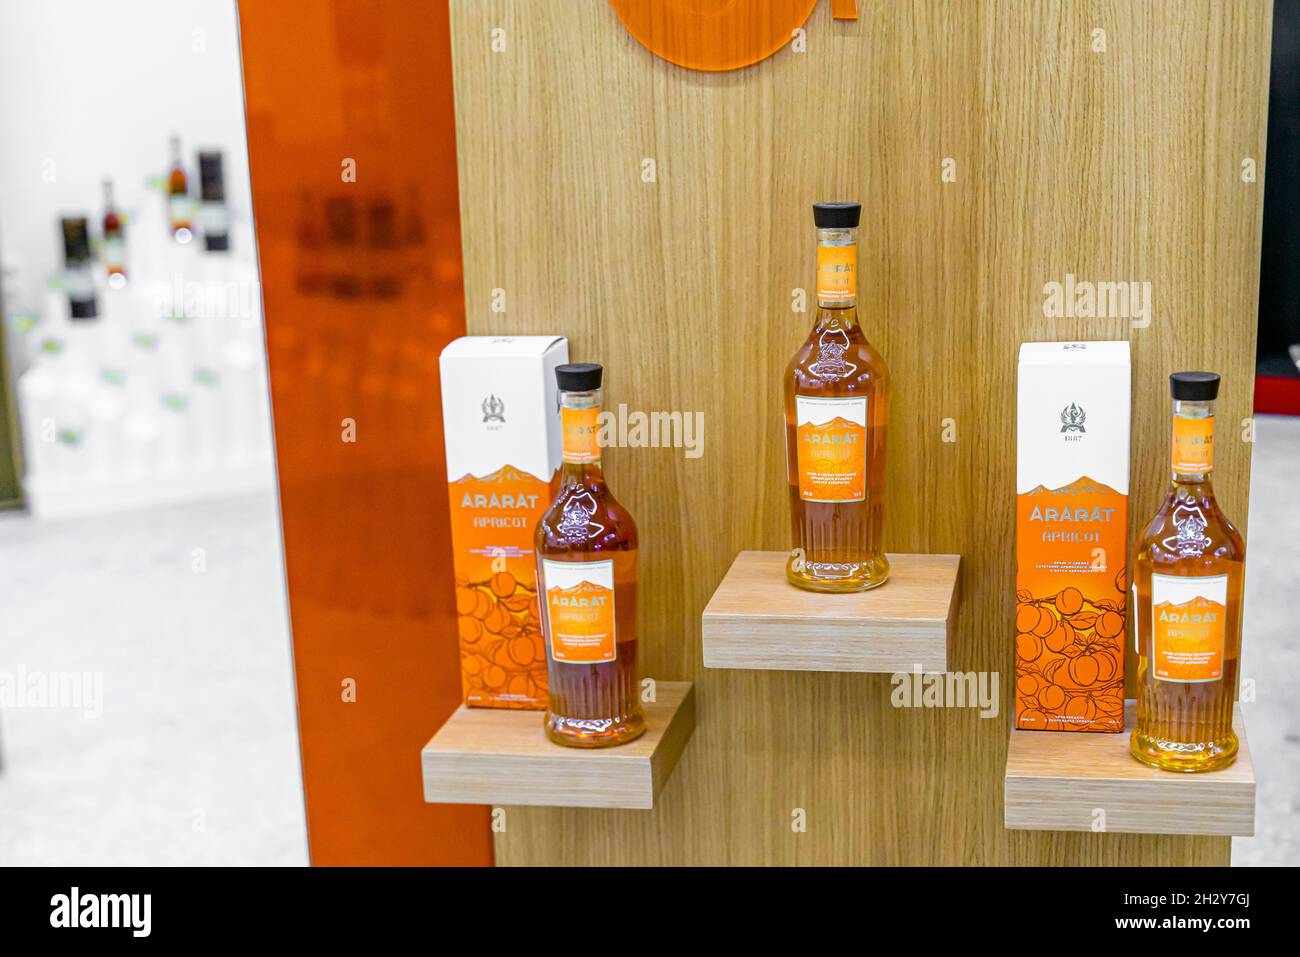 Ararat apricot brandy bottles display in Armenia pavillion in VDNKH, Moscow, Russia. Cognac-style premium brandy that has been produced since 1887. Stock Photo